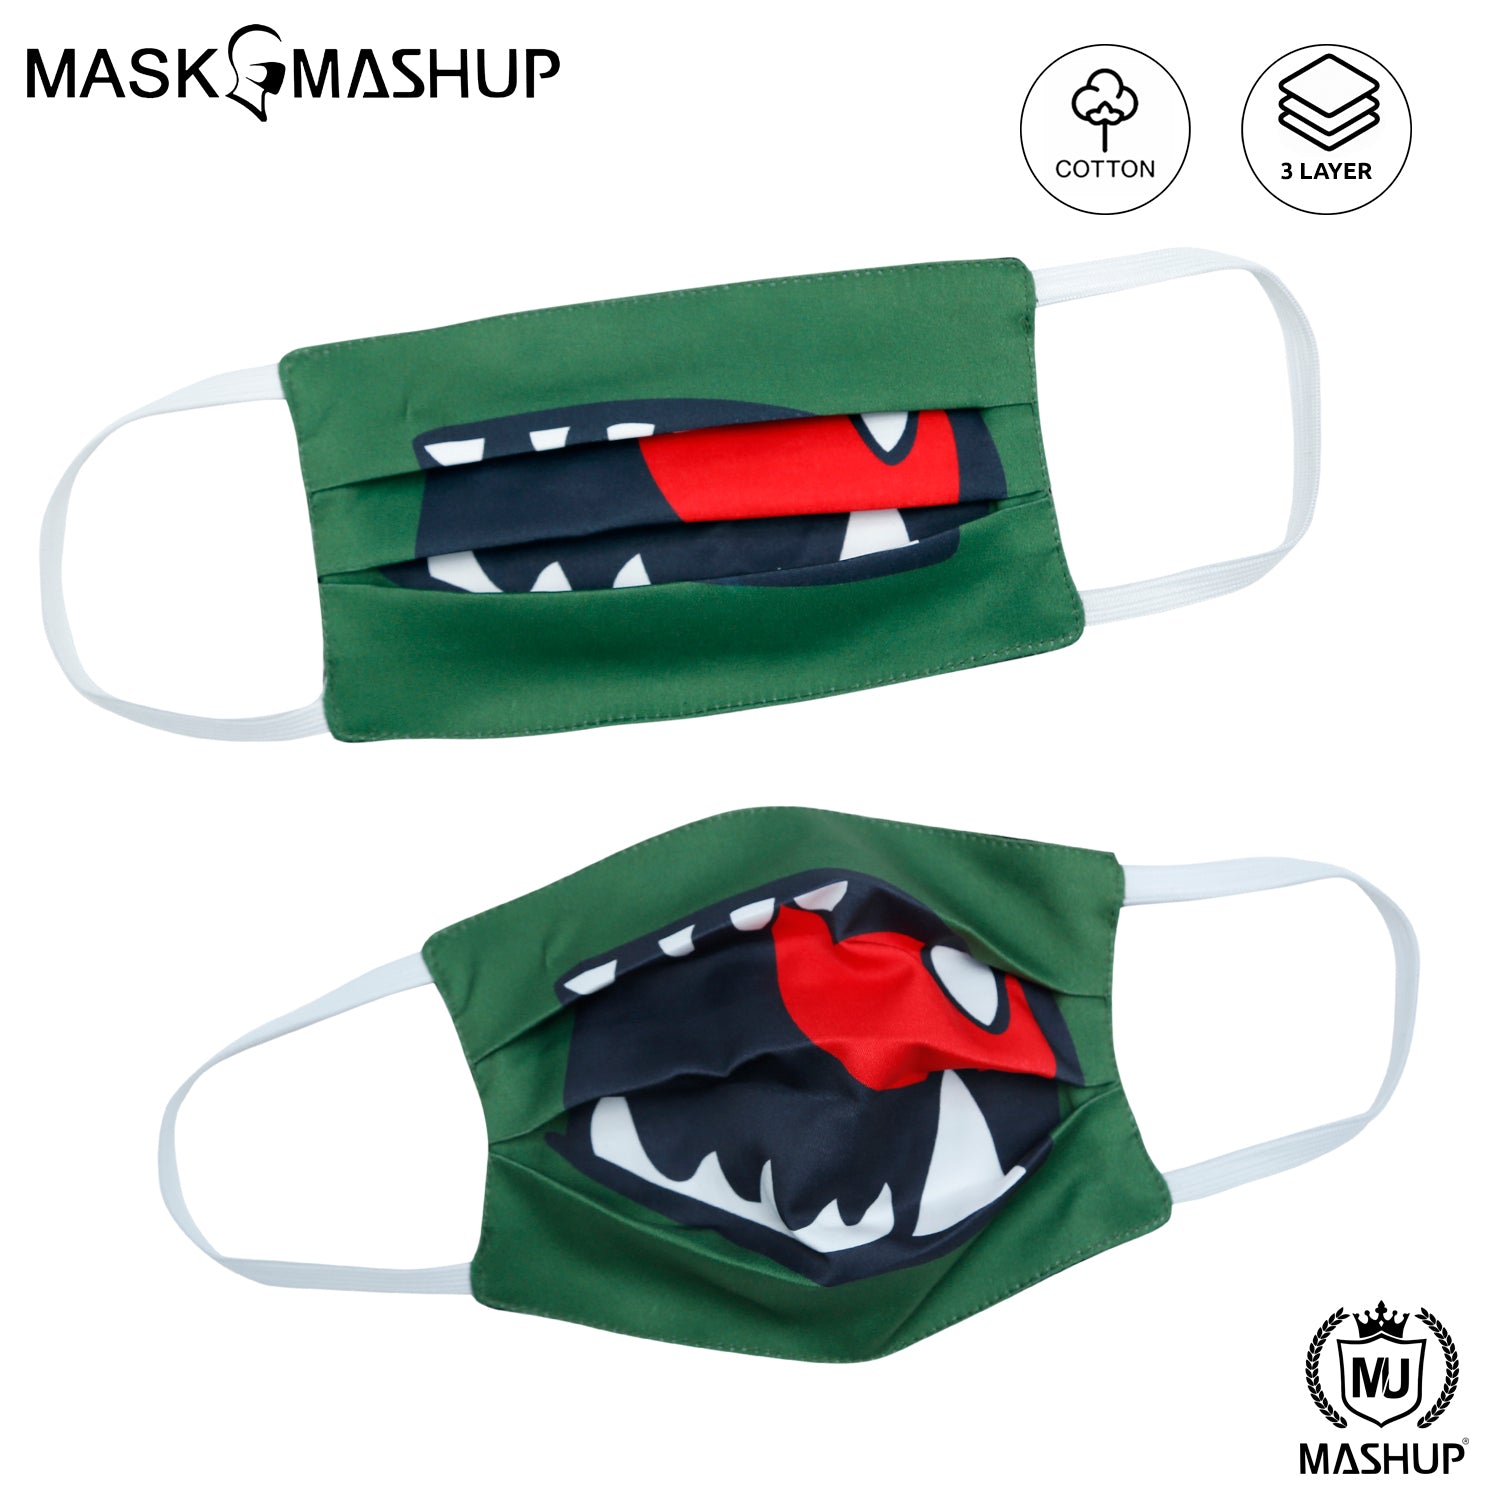 MashUp Fun Mask,Cartoon Monster Mouth Printed 3-layer Reusable Washable Protective Face Mask(Pack of 2)(Kids Size)(Universal Fit) - mashup boys